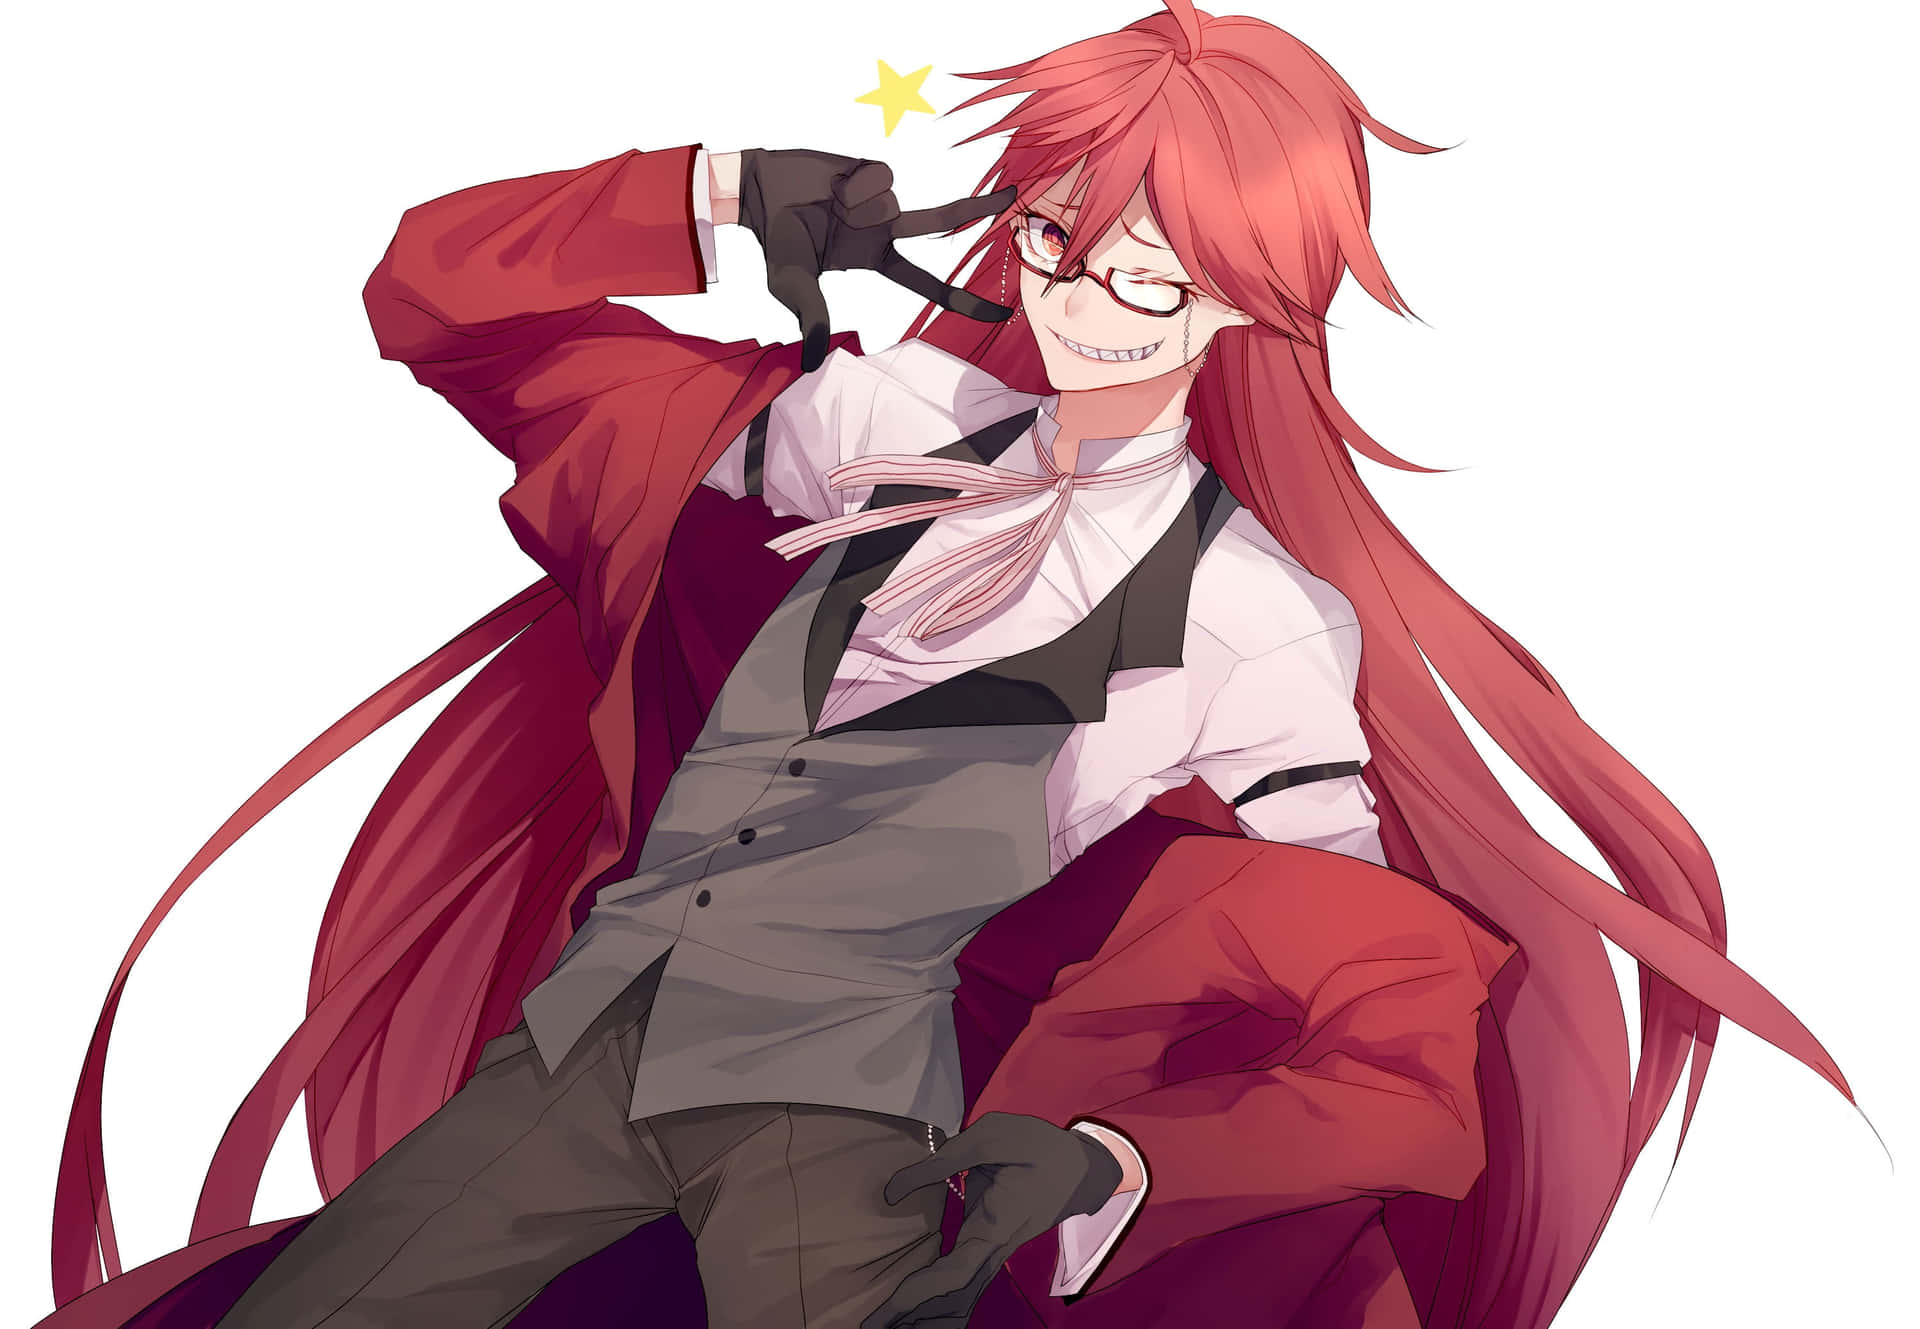 Stylish Grell Sutcliff strikes a pose with Death Scythe Wallpaper